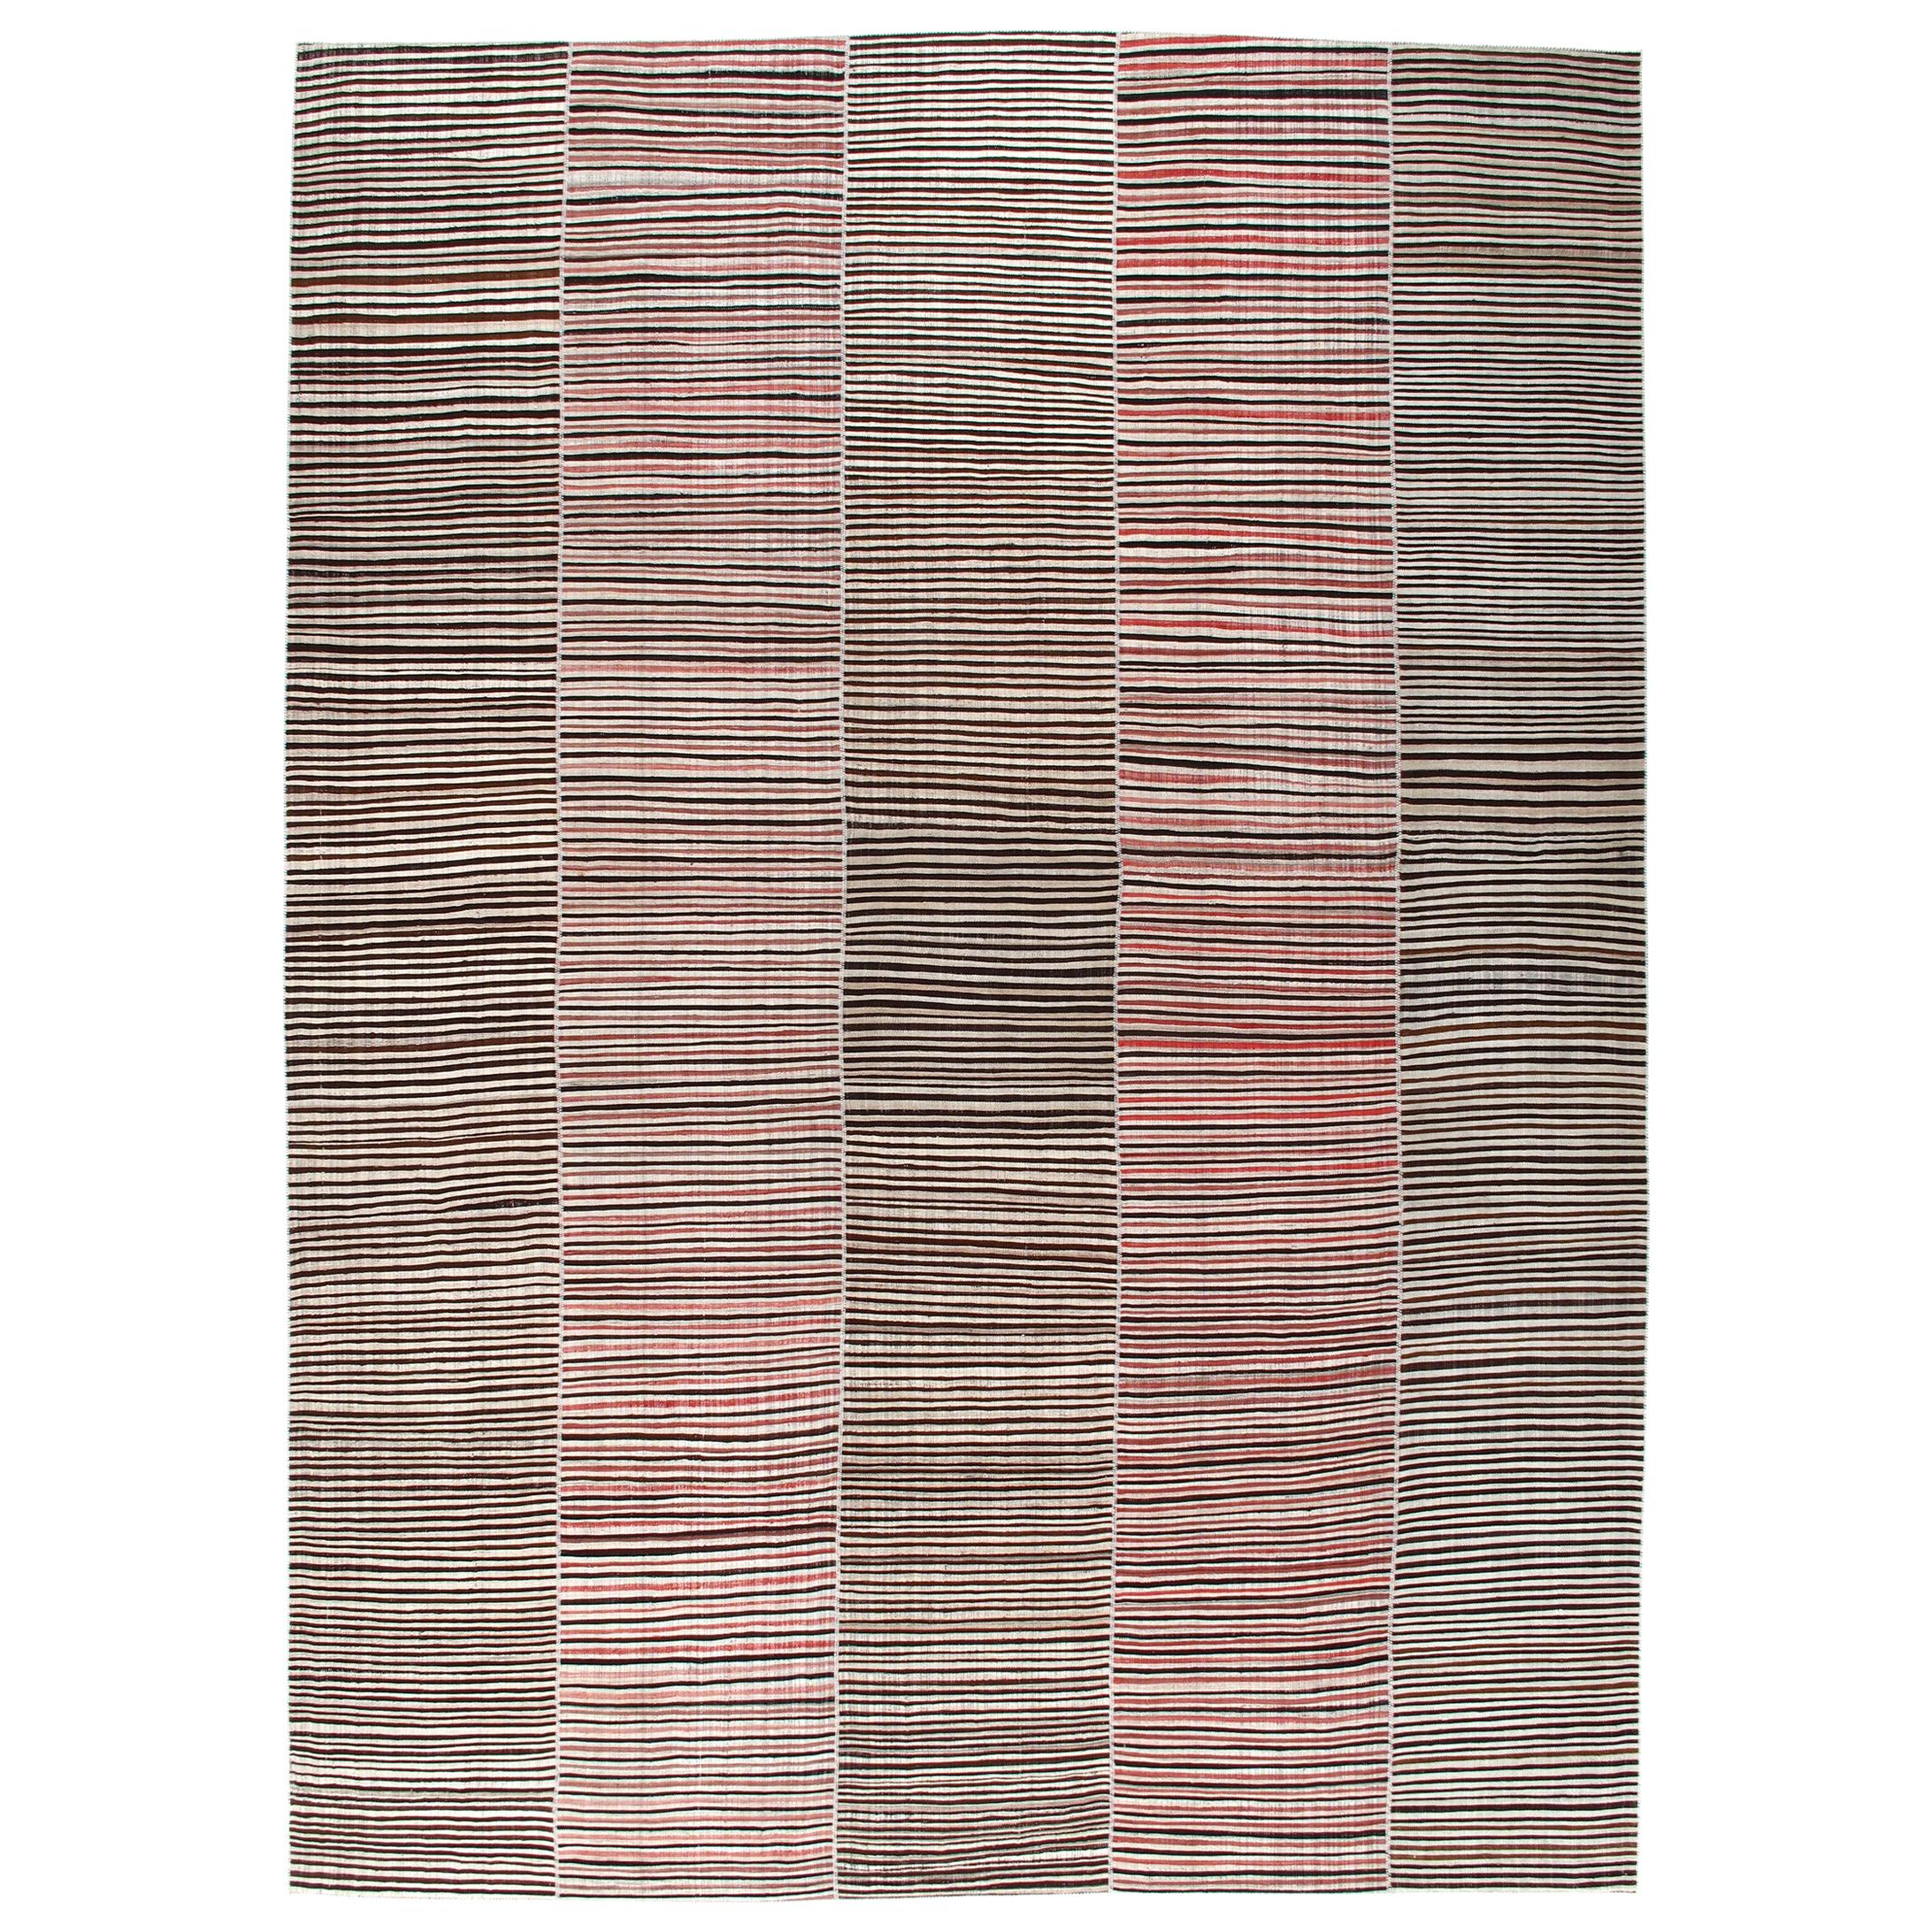 Vintage Persian Mazandaran Handwoven Flat-Weave Rug in Brown and Red Stripes